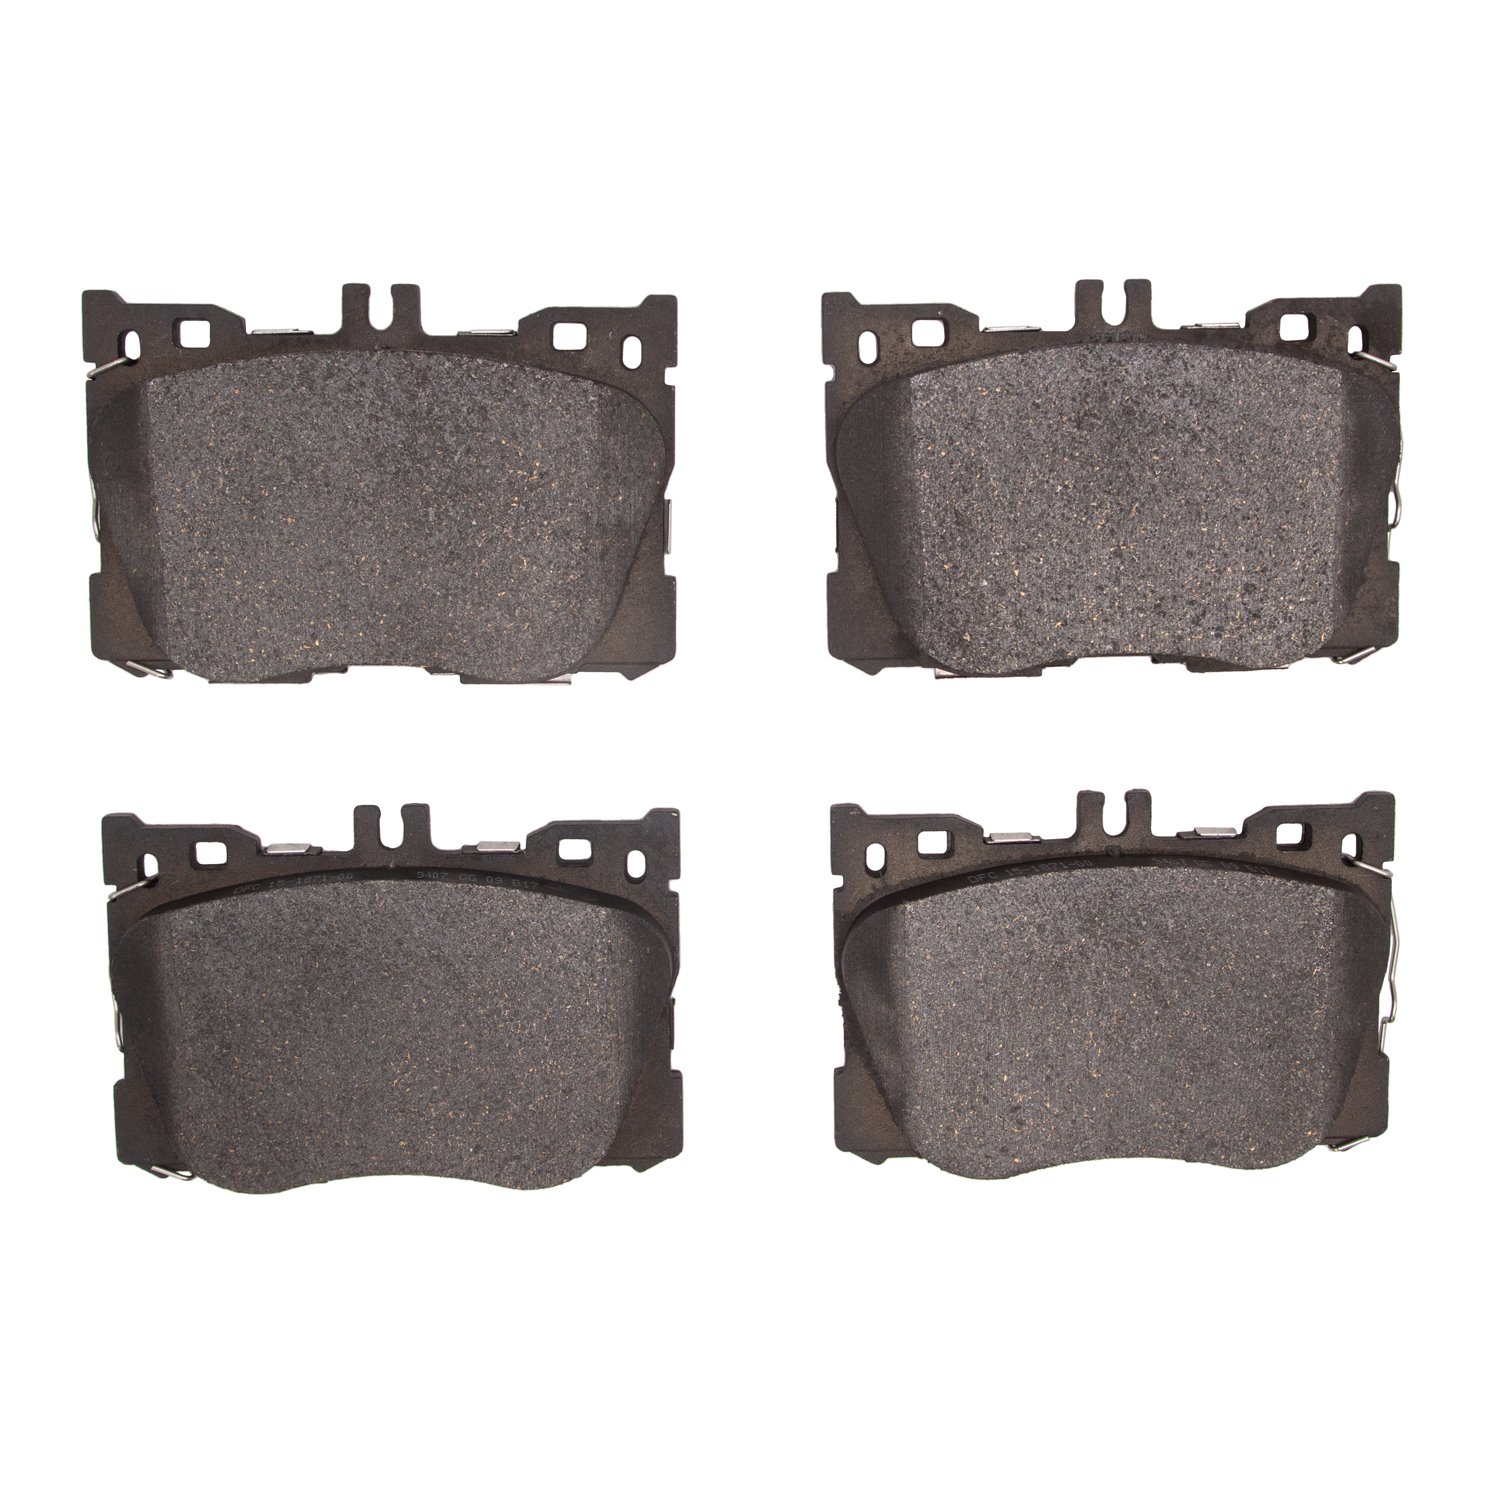 1600-1871-00 5000 Euro Ceramic Brake Pads, Fits Select Mercedes-Benz, Position: Front